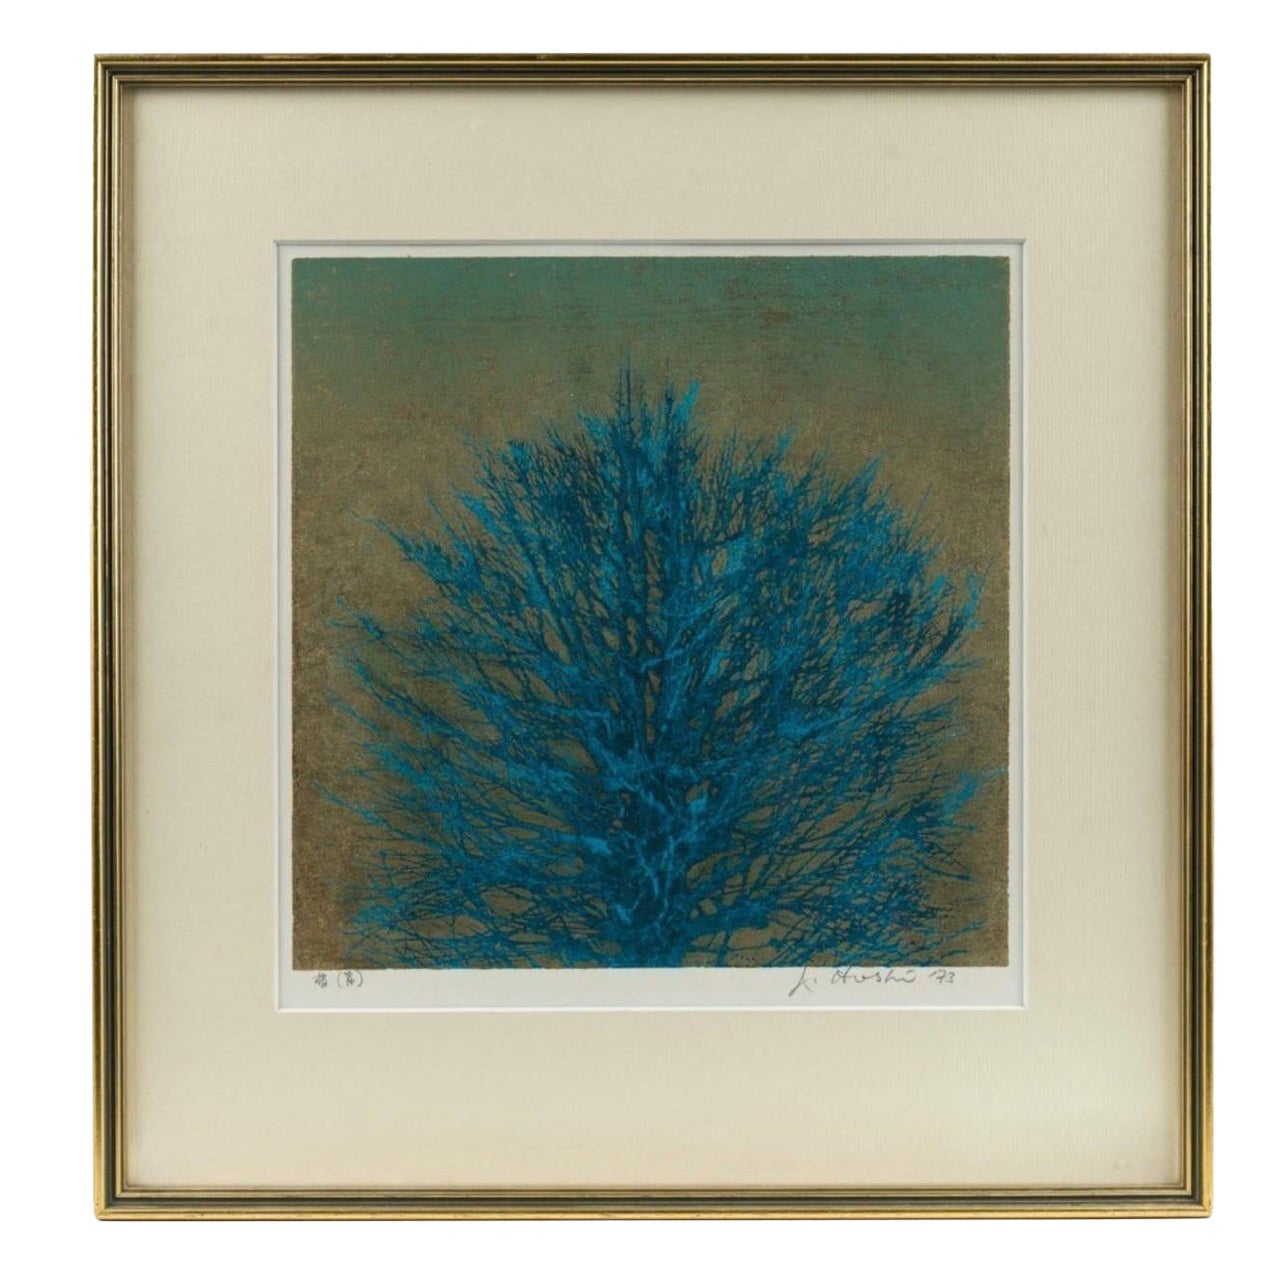 JOICHI HOSHI (1911-1979), Blue Tree, Woodblock, signed lower right, Dated 1973